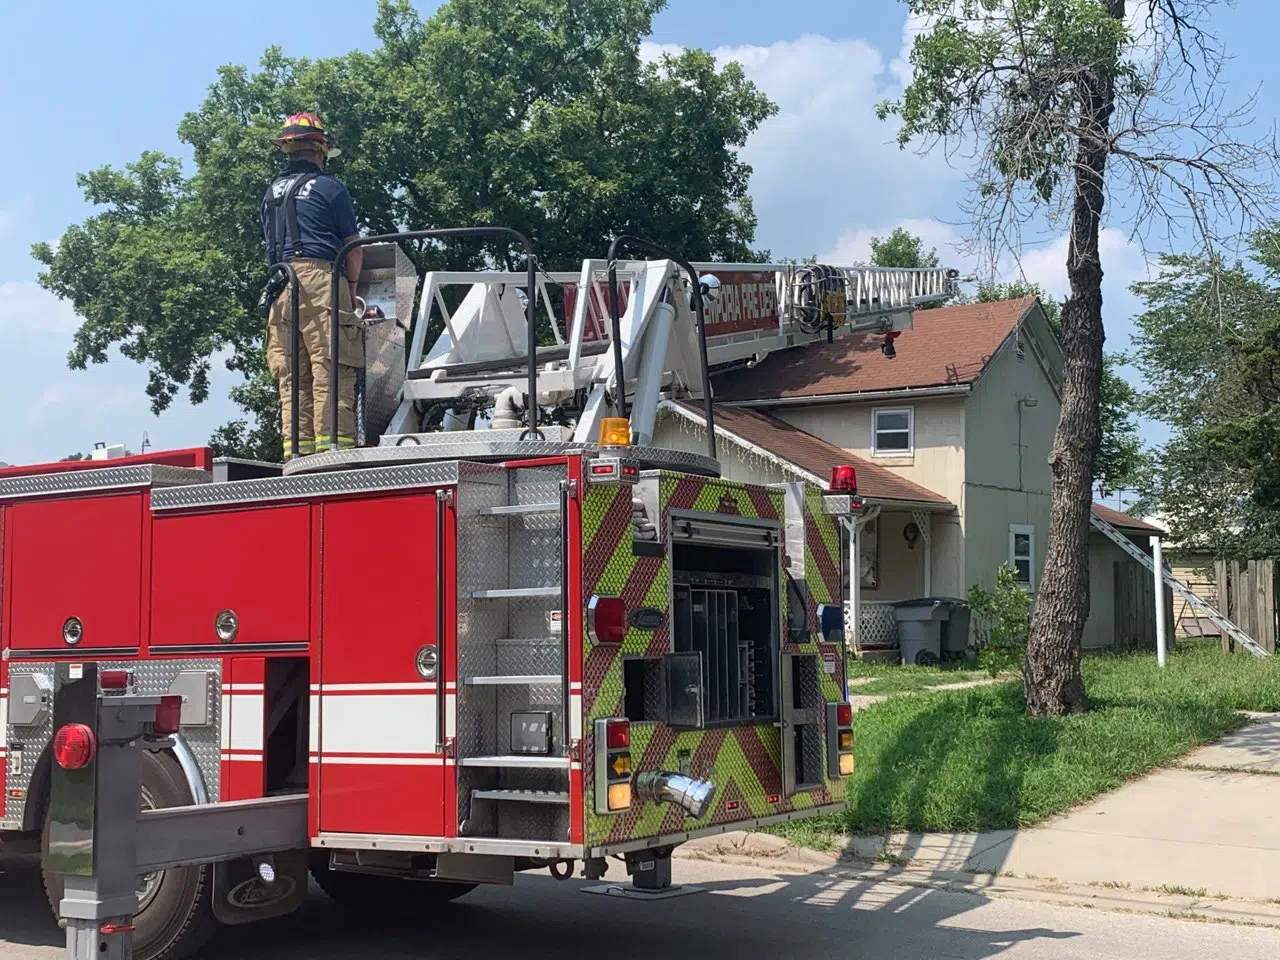 Hartford-Neosho Fire handles tractor fire, while Emporia Fire deals with small house fire